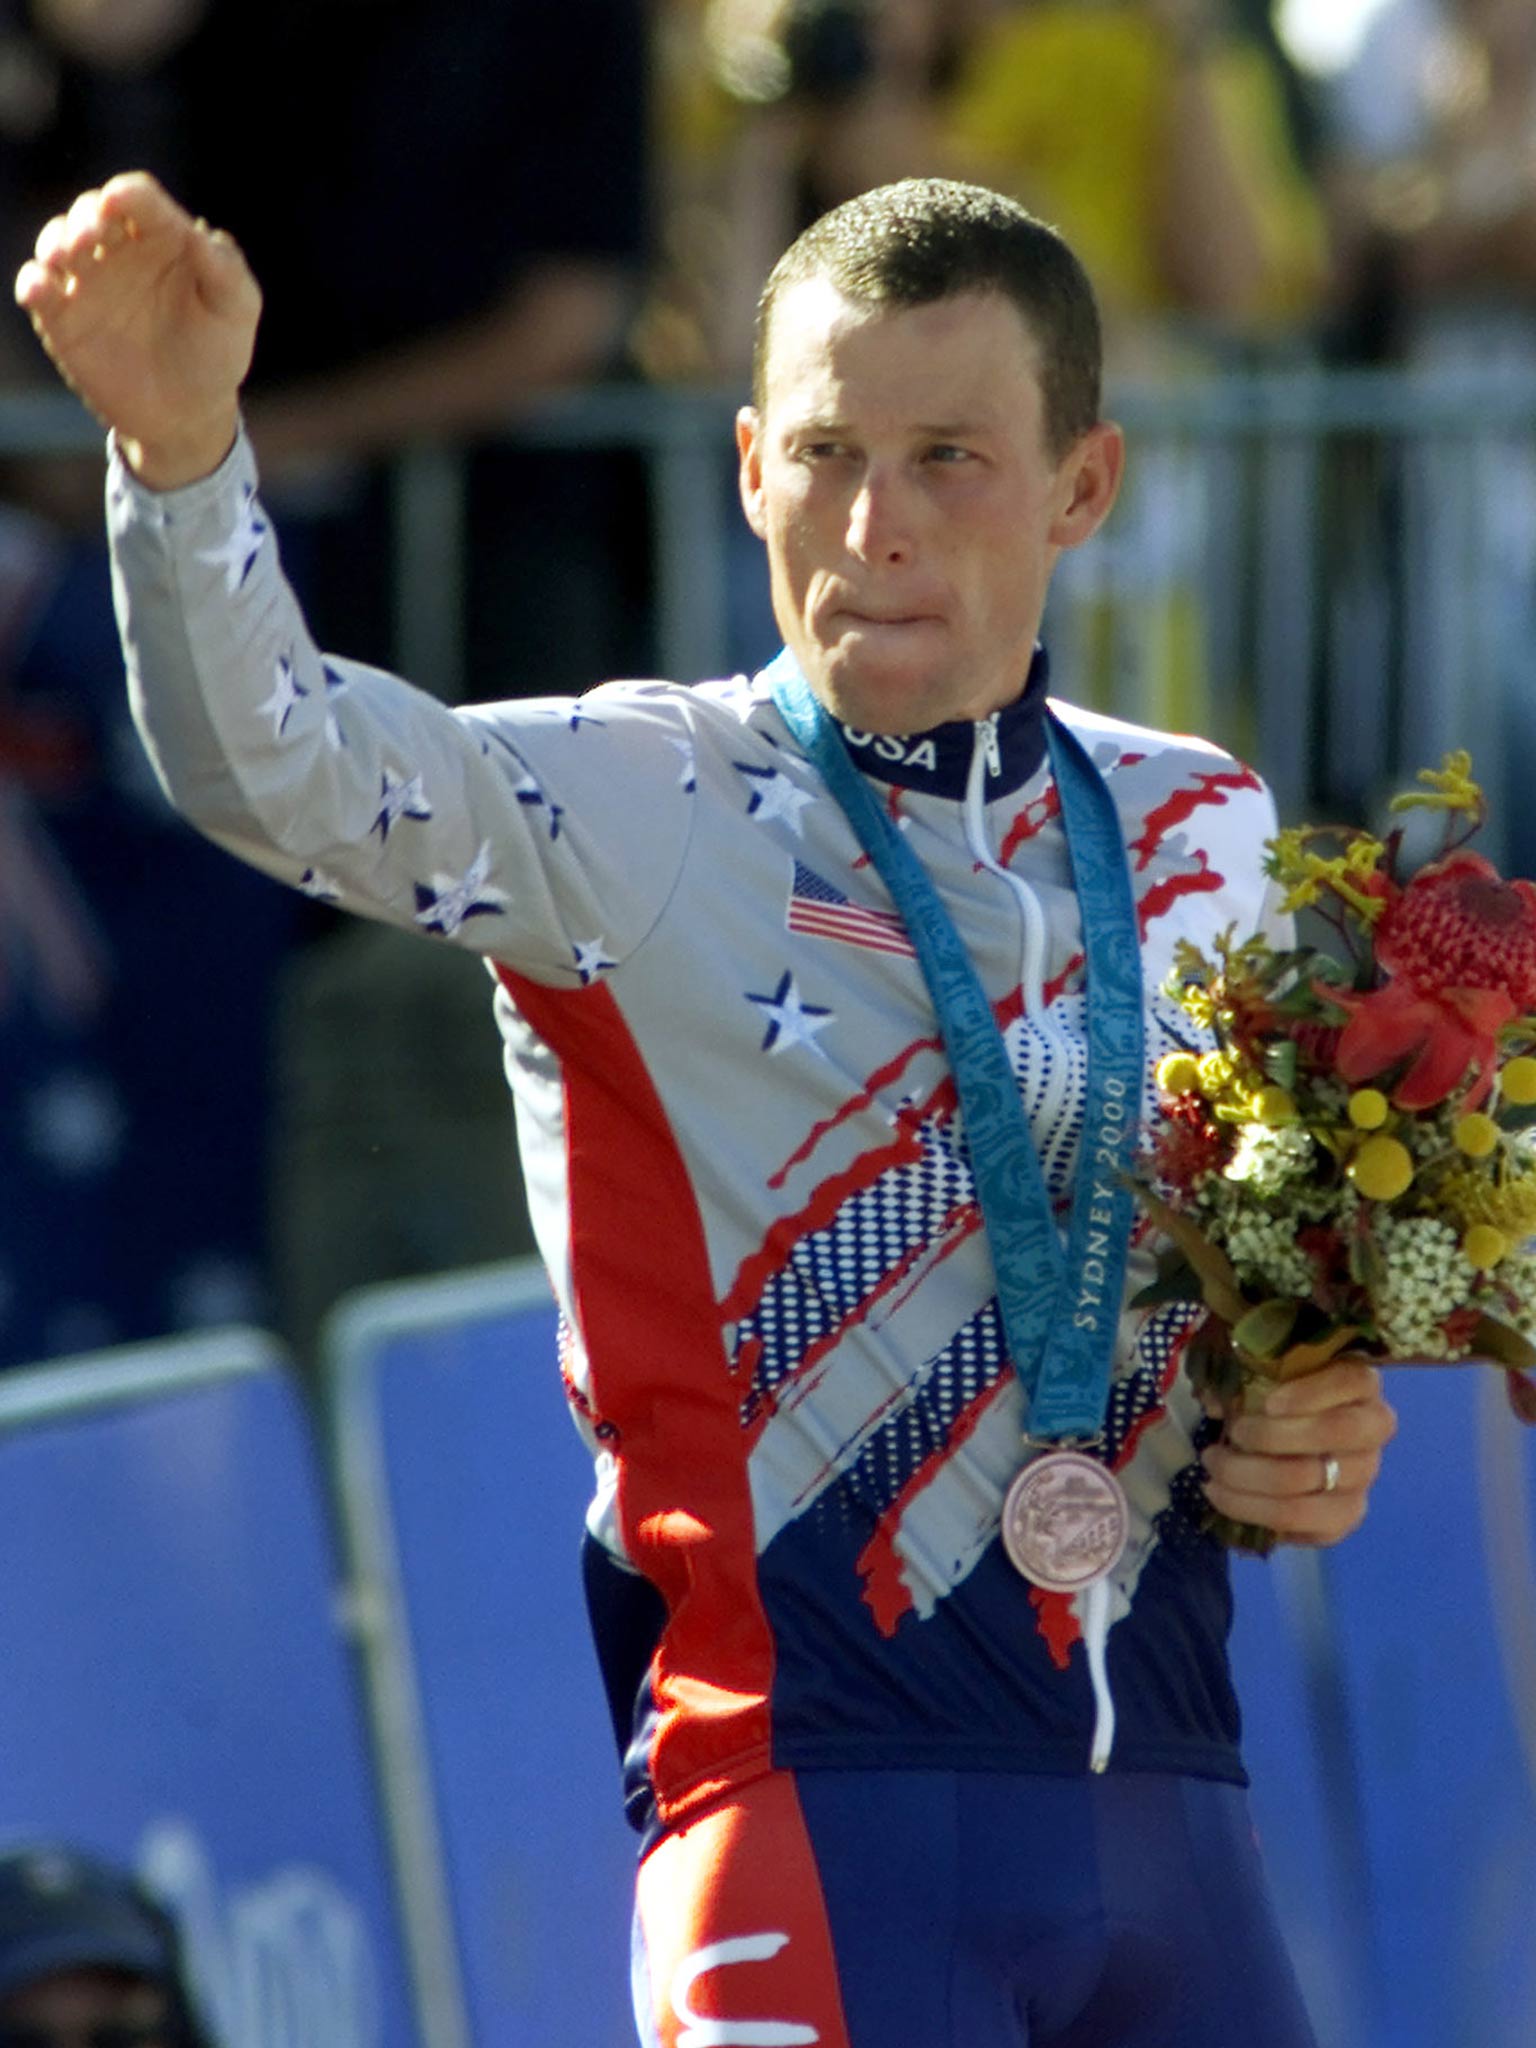 Lance Armstrong pictured with his bronze medal at the 2000 Sydney Olympics